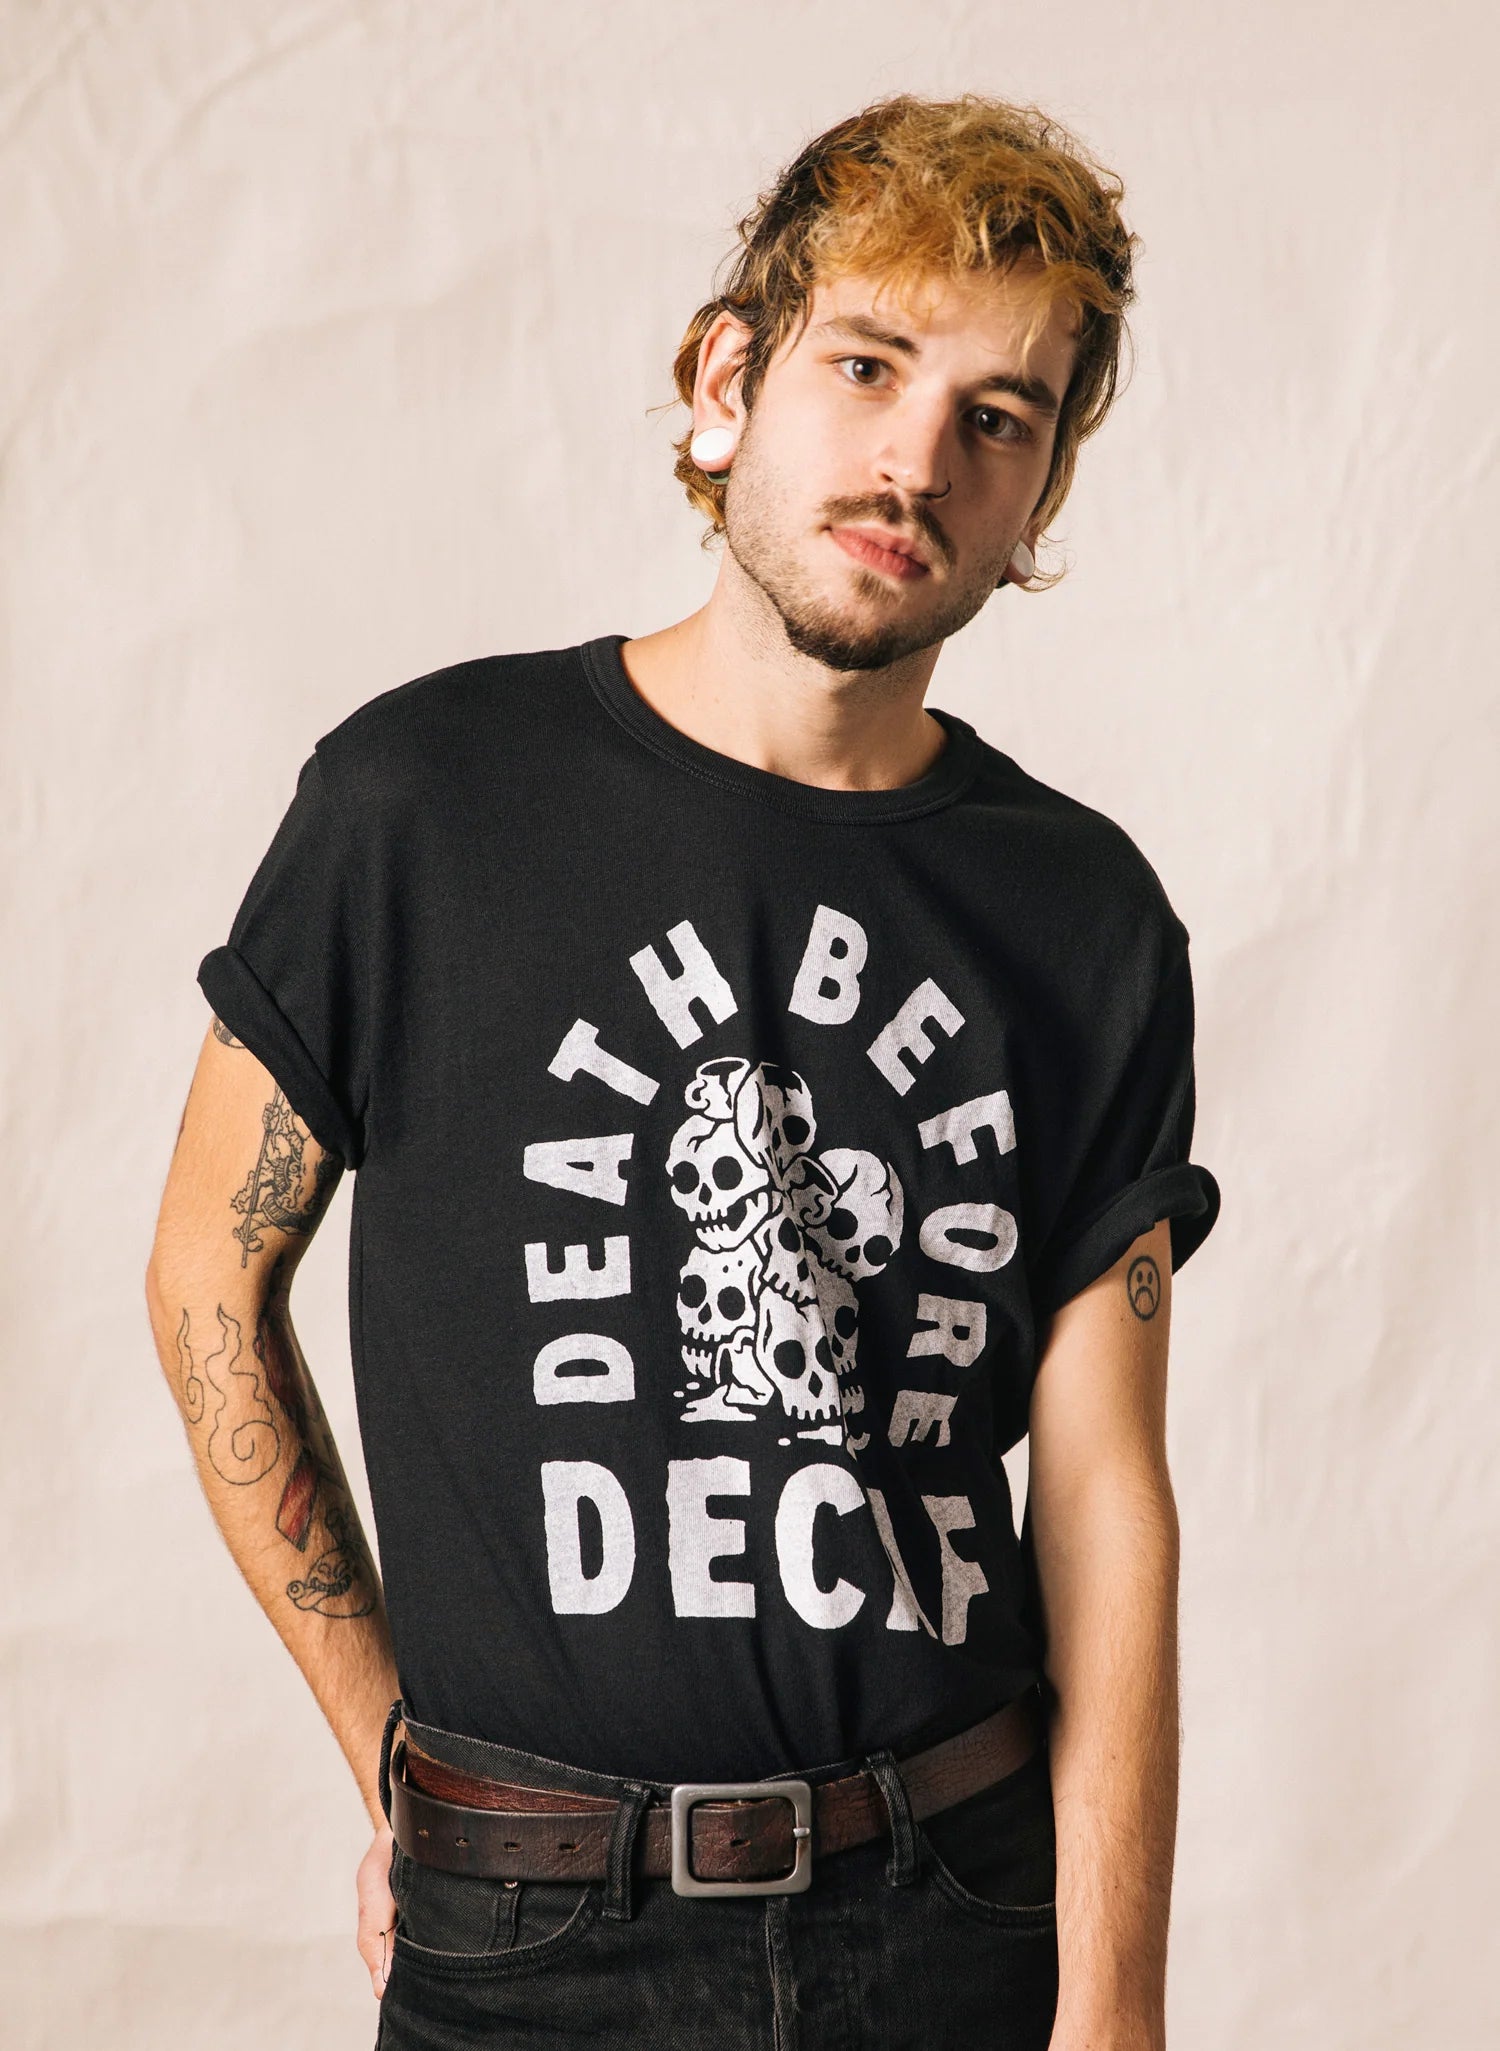 Death Before Decaf T Shirt